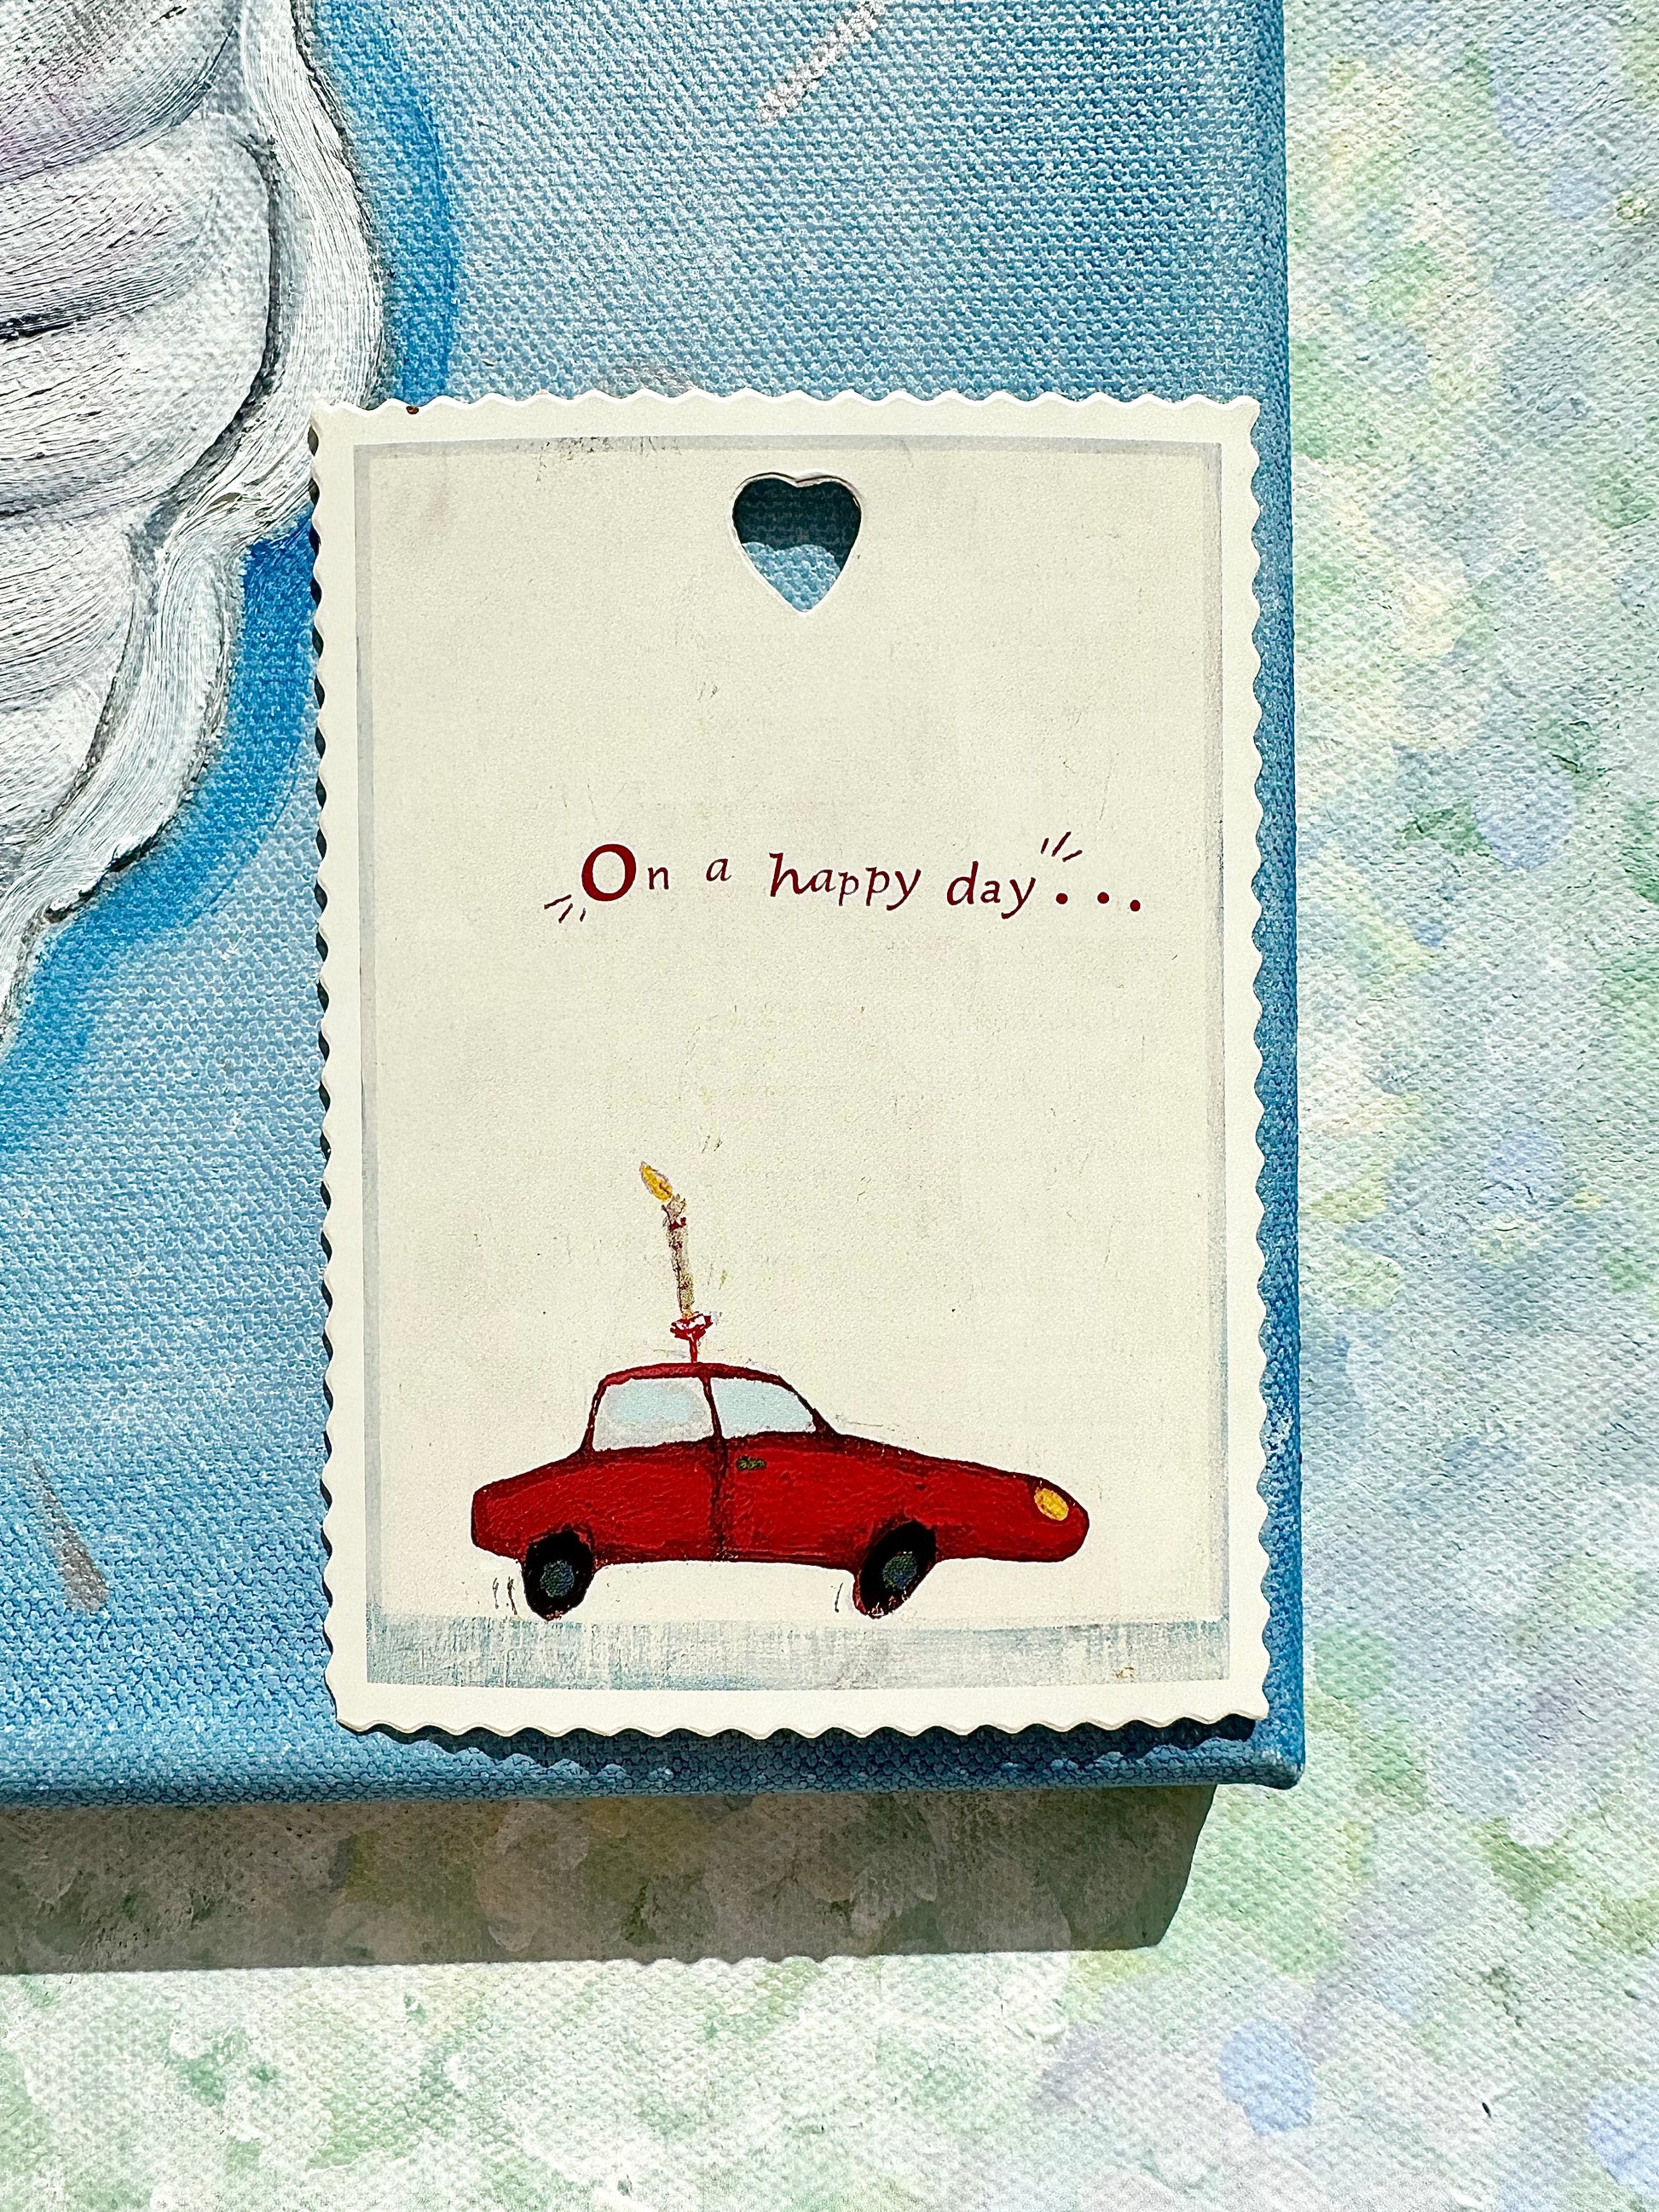 Mini Card "On a Happy Day" - 2012